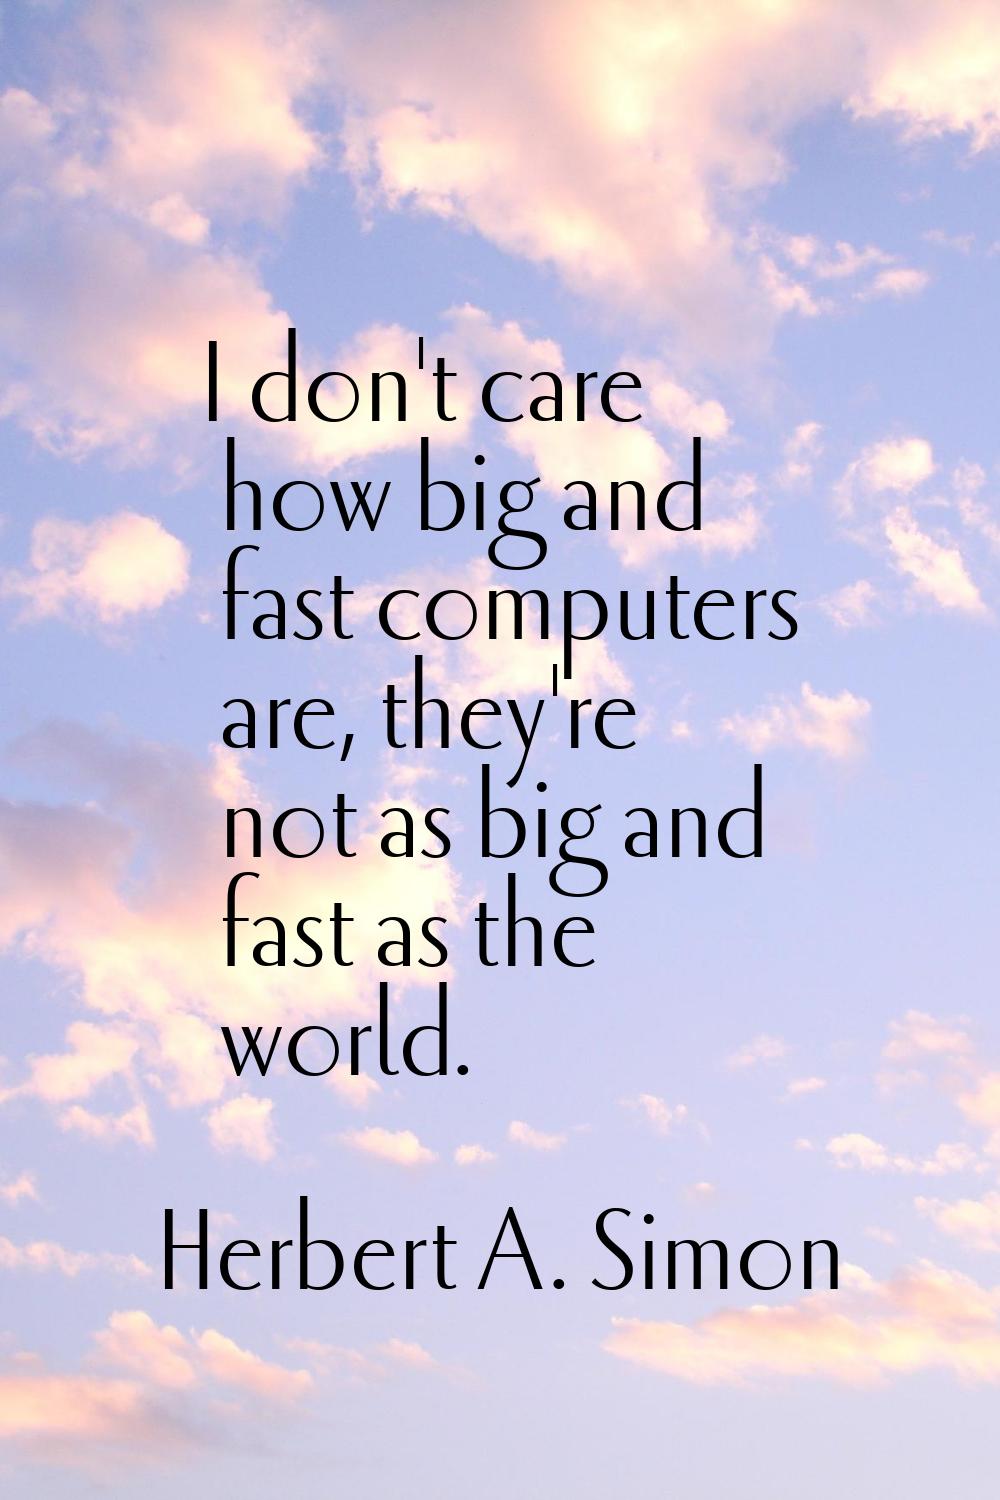 I don't care how big and fast computers are, they're not as big and fast as the world.